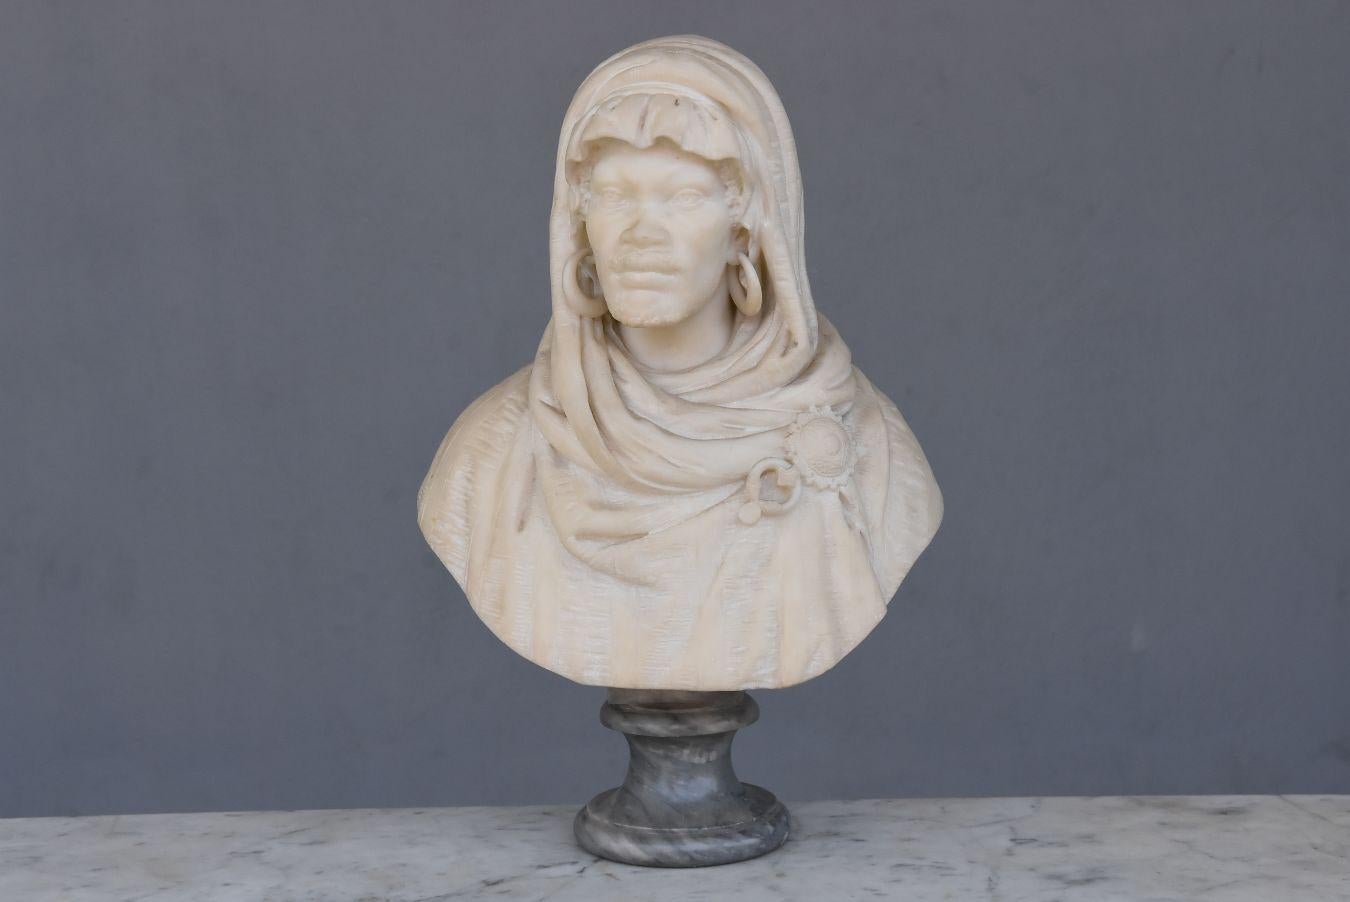 Pair of 19th century busts orientalist Carrara marble by Vicenzo Ramaschiello Height 50 cm (for men) and 42 cm for women. To bring closer to the work of Charles Cordier who carved a pair of busts quite similar, foot marble shower gray saint Anne.